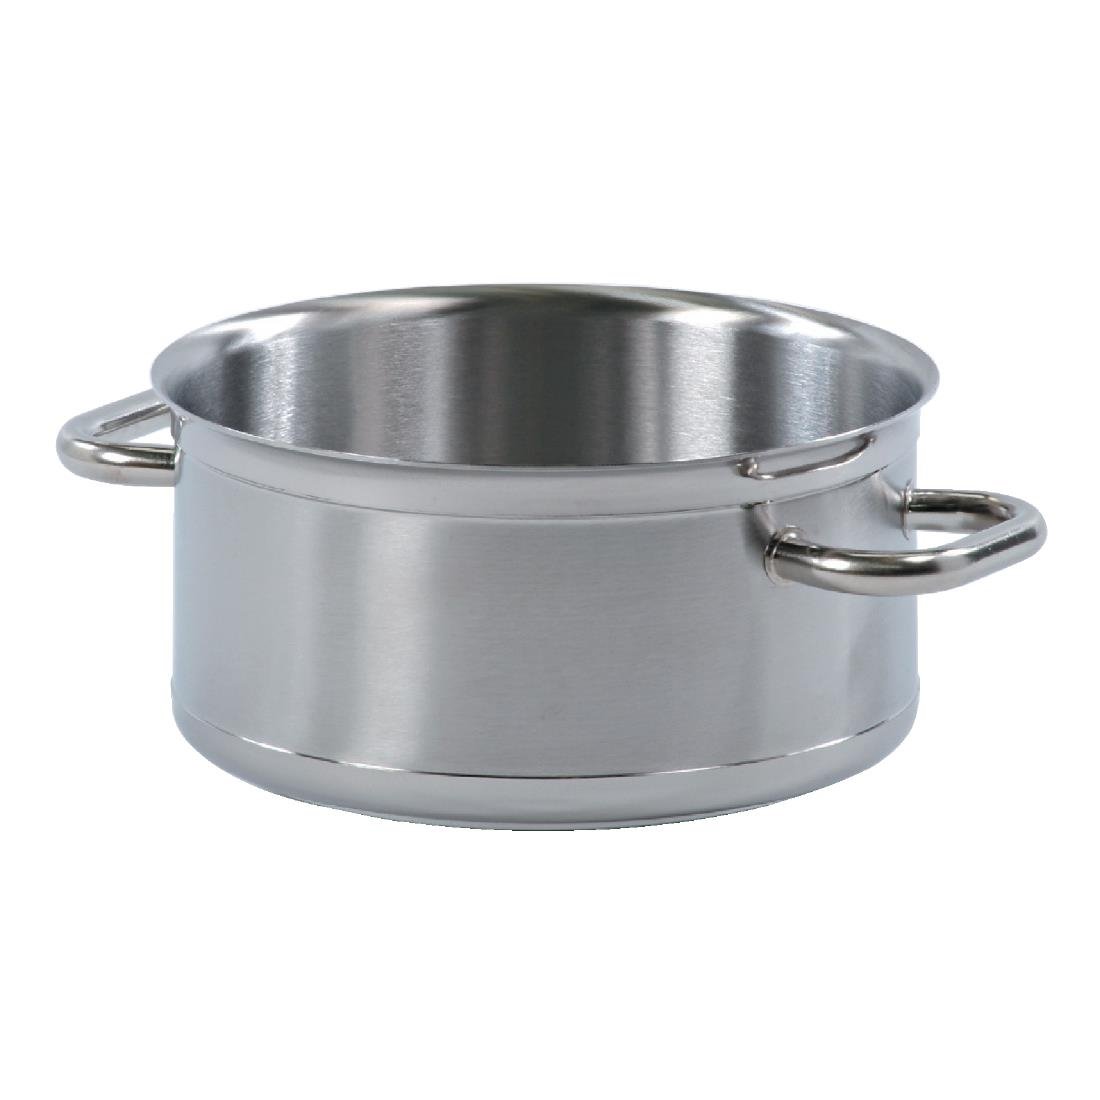 Bourgeat Tradition Plus Casserole Pan 12.8Ltr P290 JD Catering Equipment Solutions Ltd